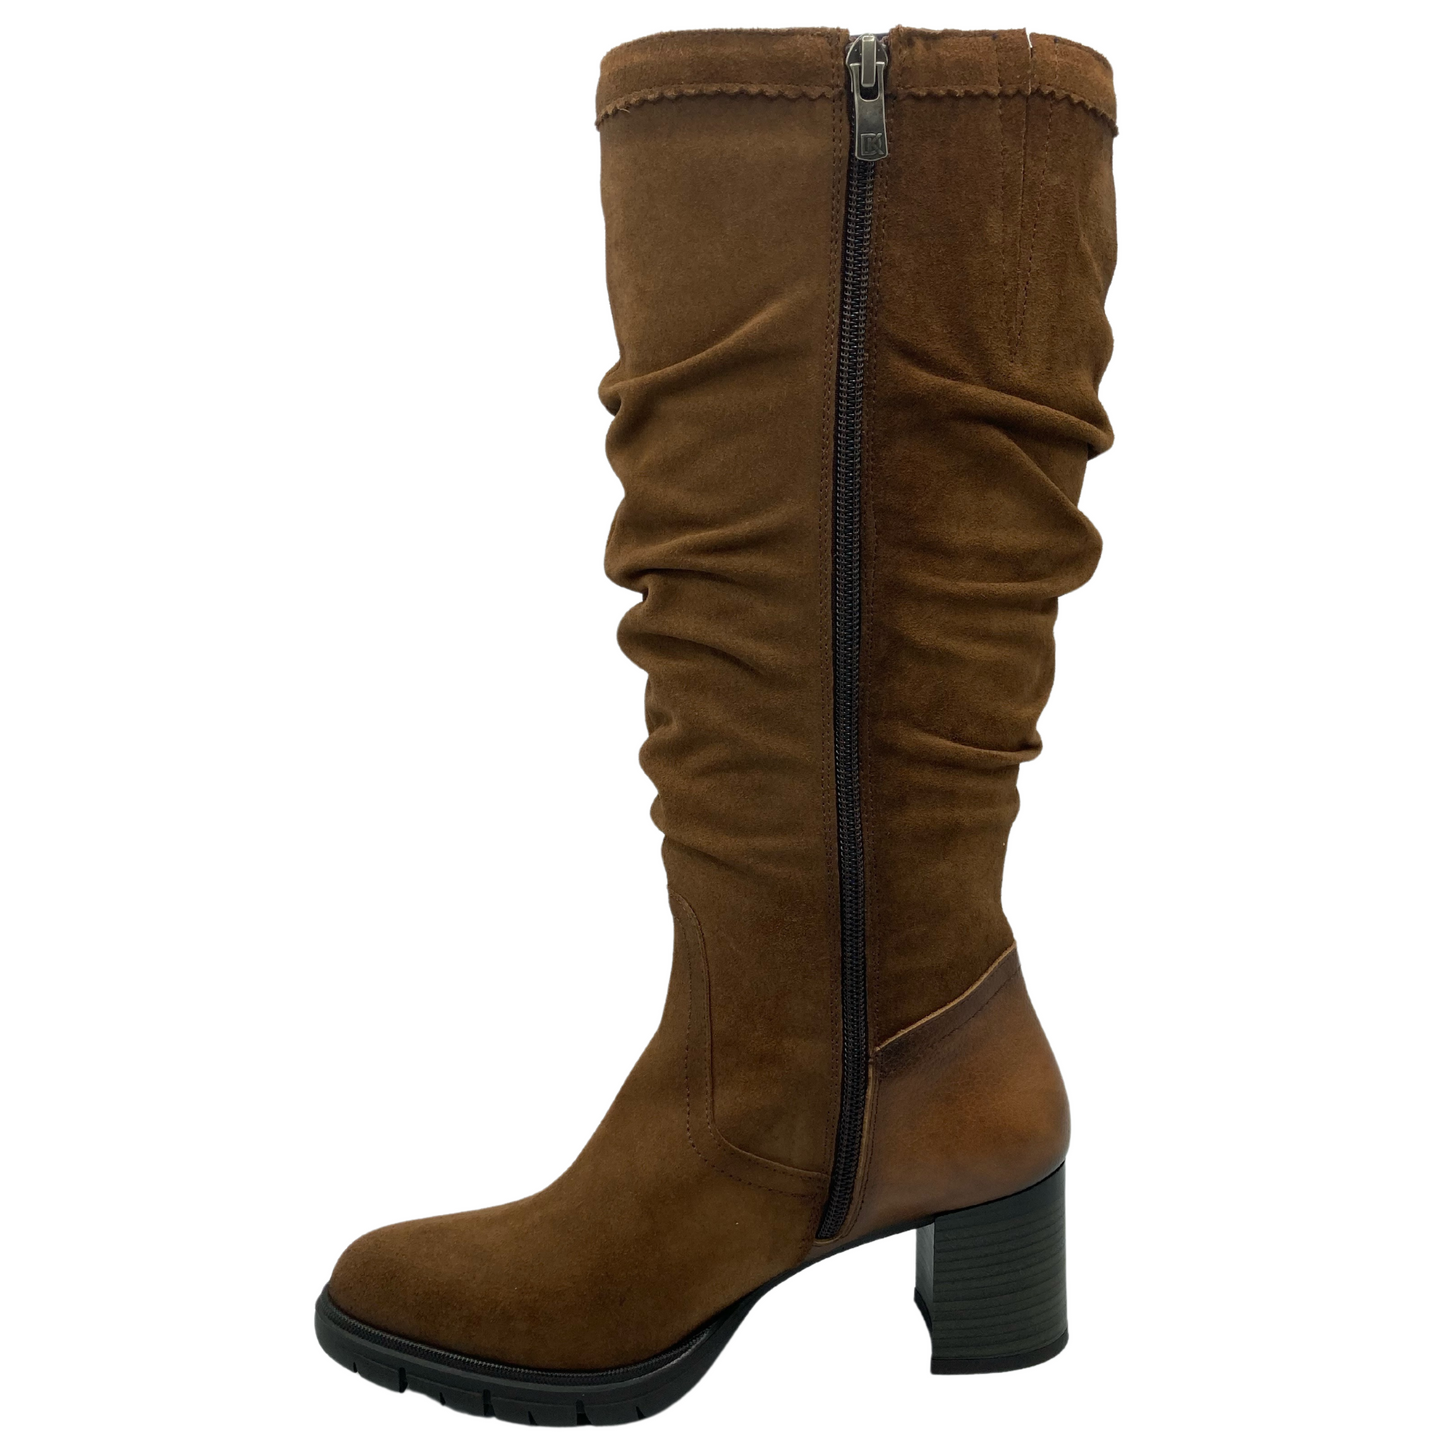 Left facing view of brown suede slouchy boot with black block heel